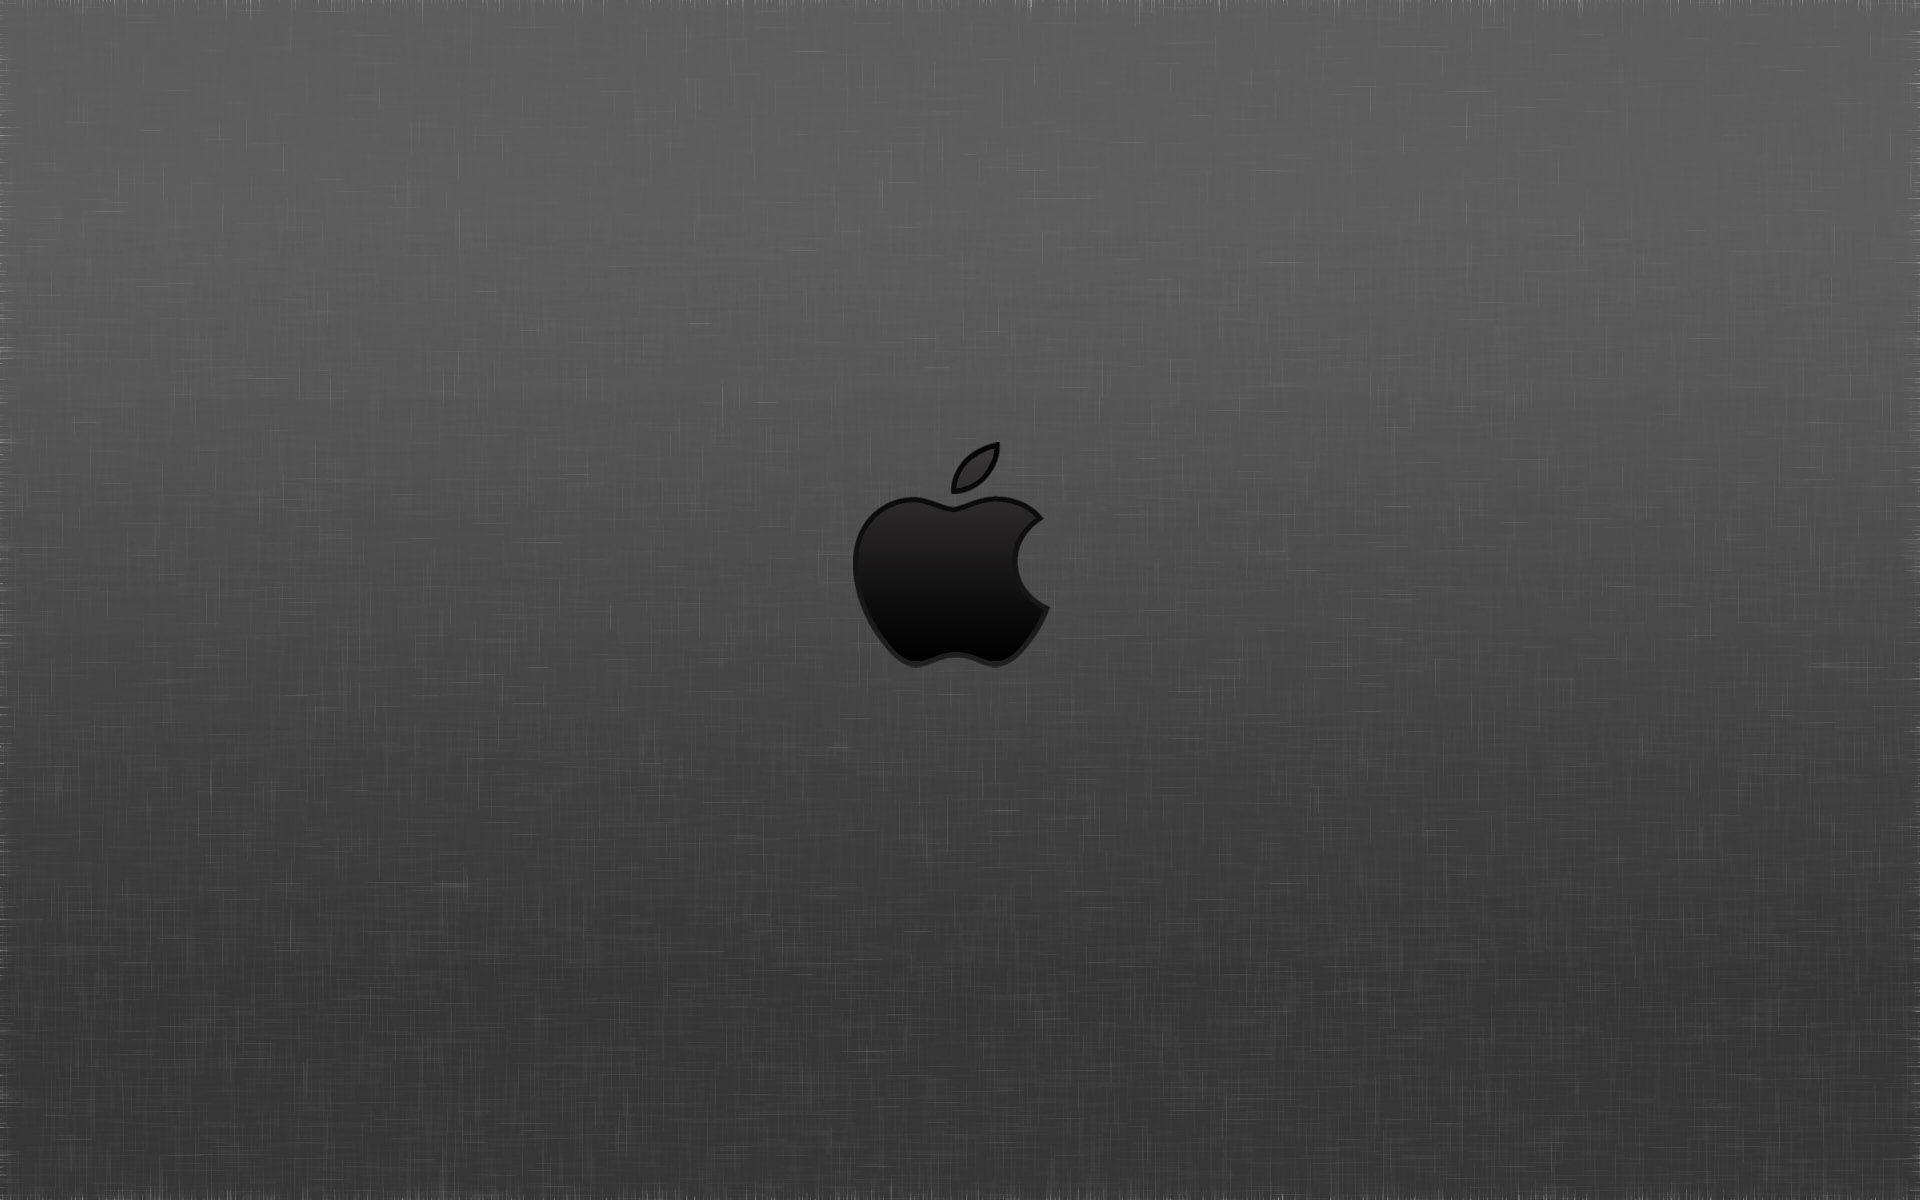 A Black Apple Logo Combined with Gray Background, Crossed Lines